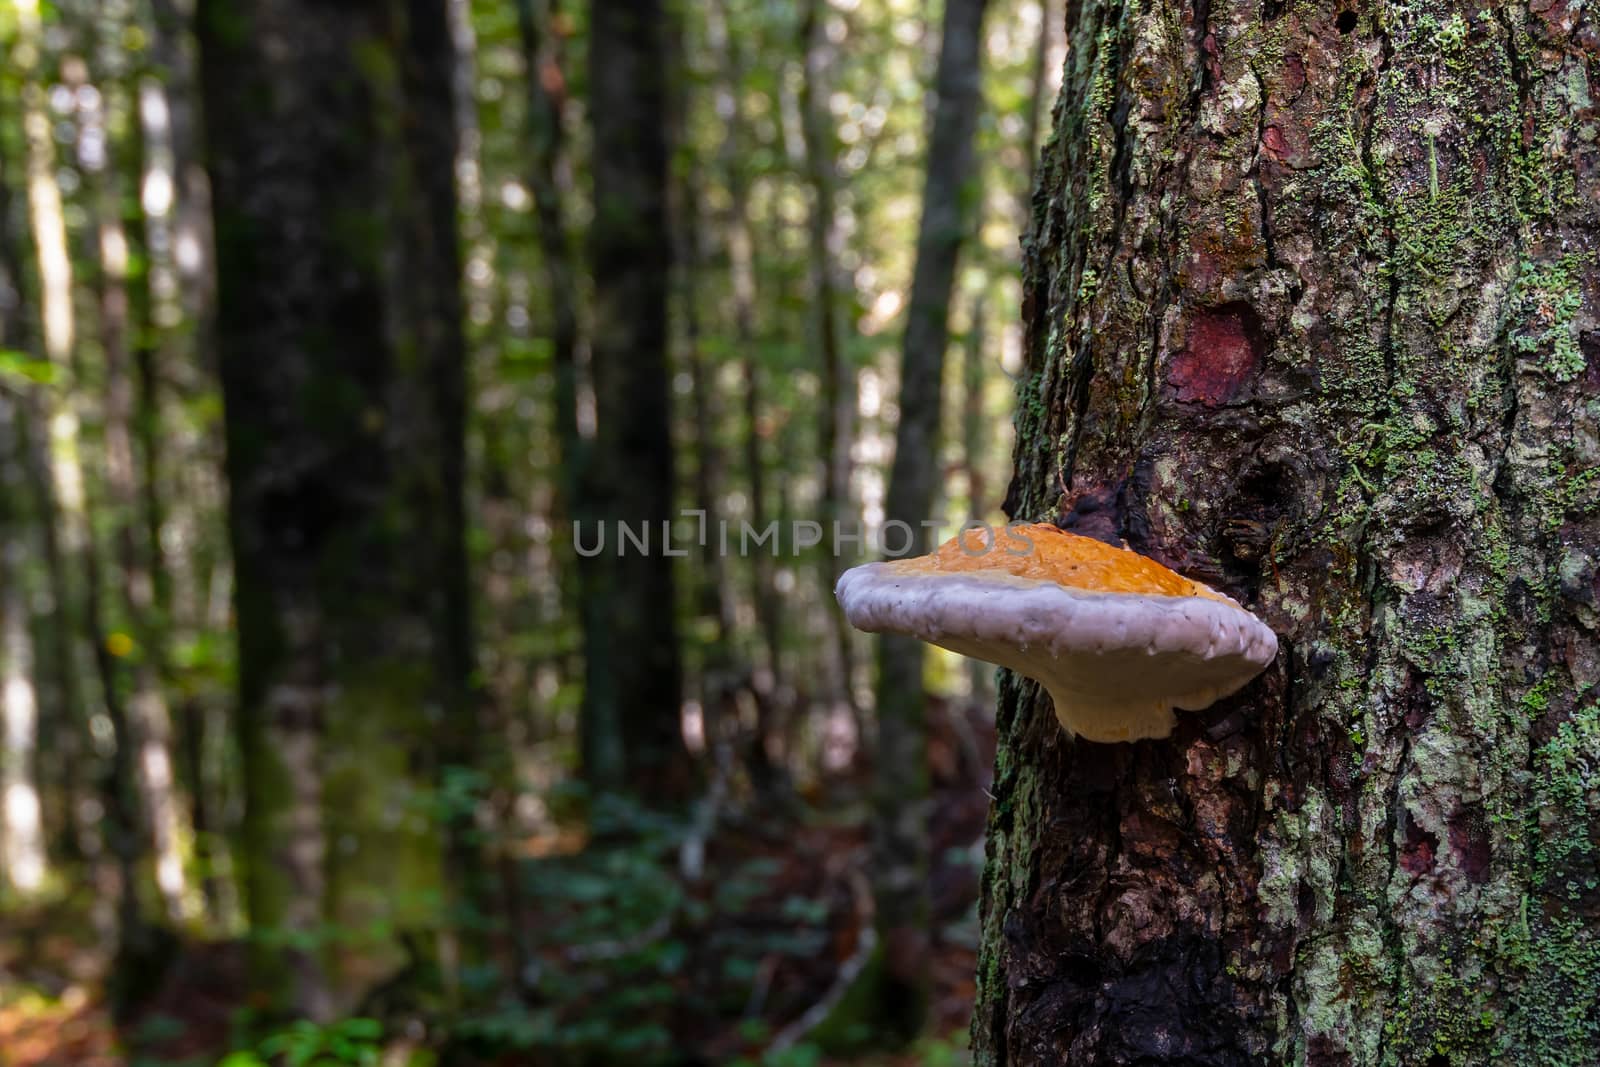 Mushroom on tree with green moss in forest